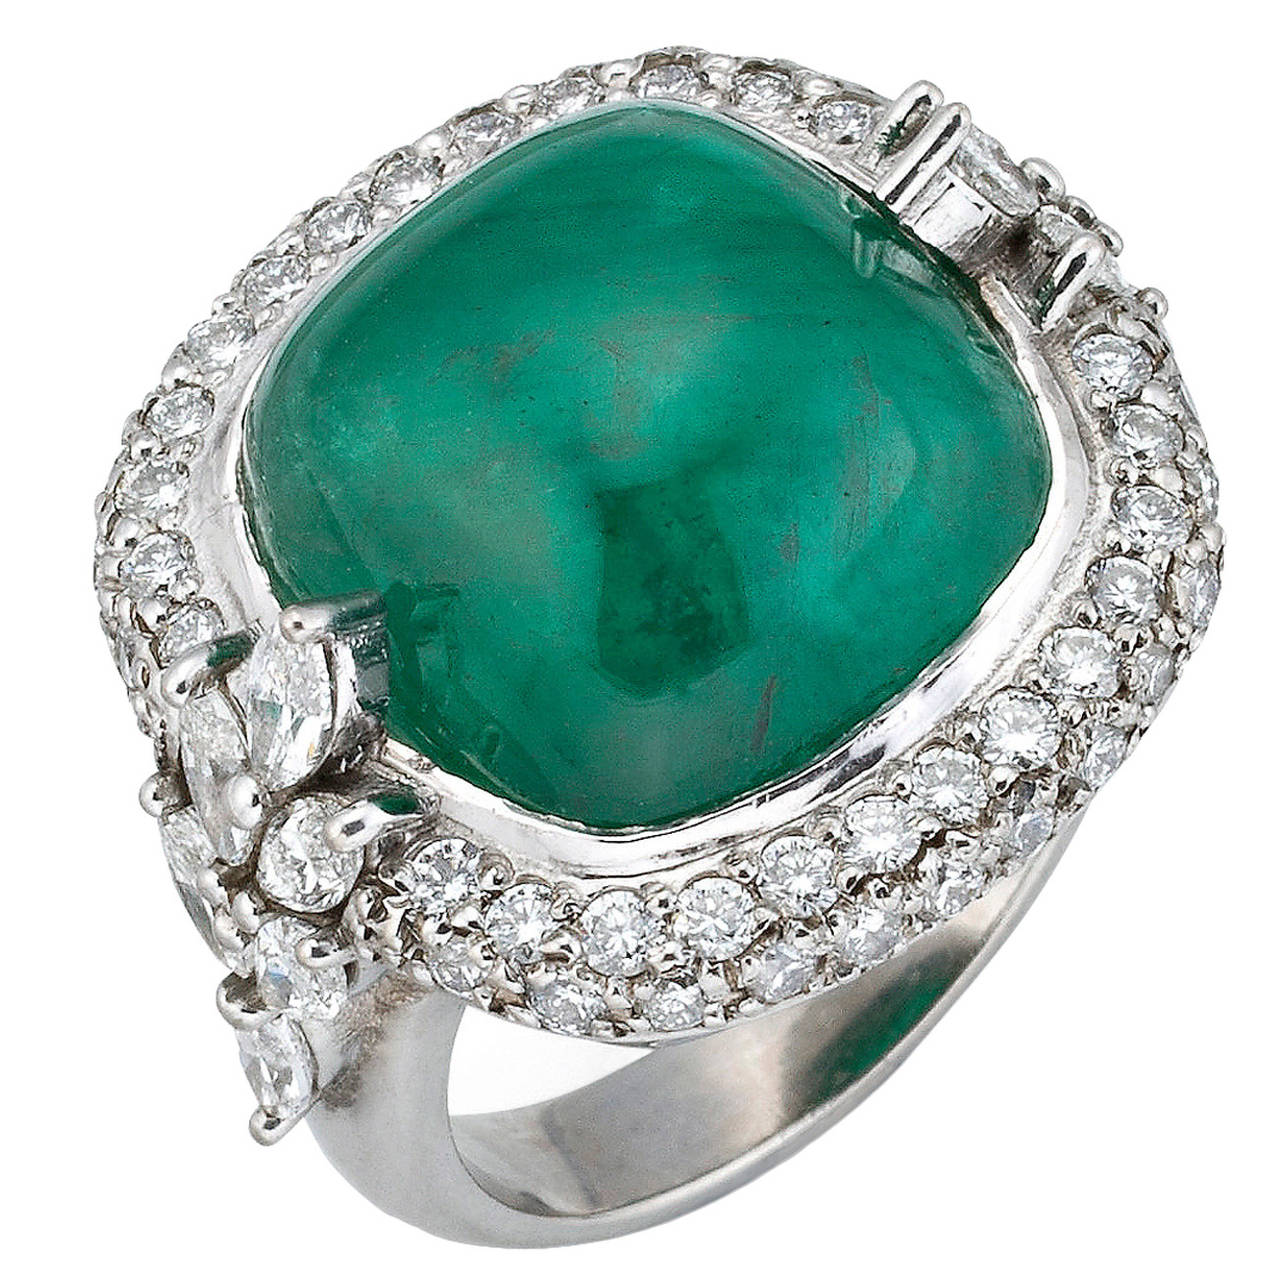 Sugarloaf Cabochon Cut Emerald Diamond Cocktail Ring For Sale